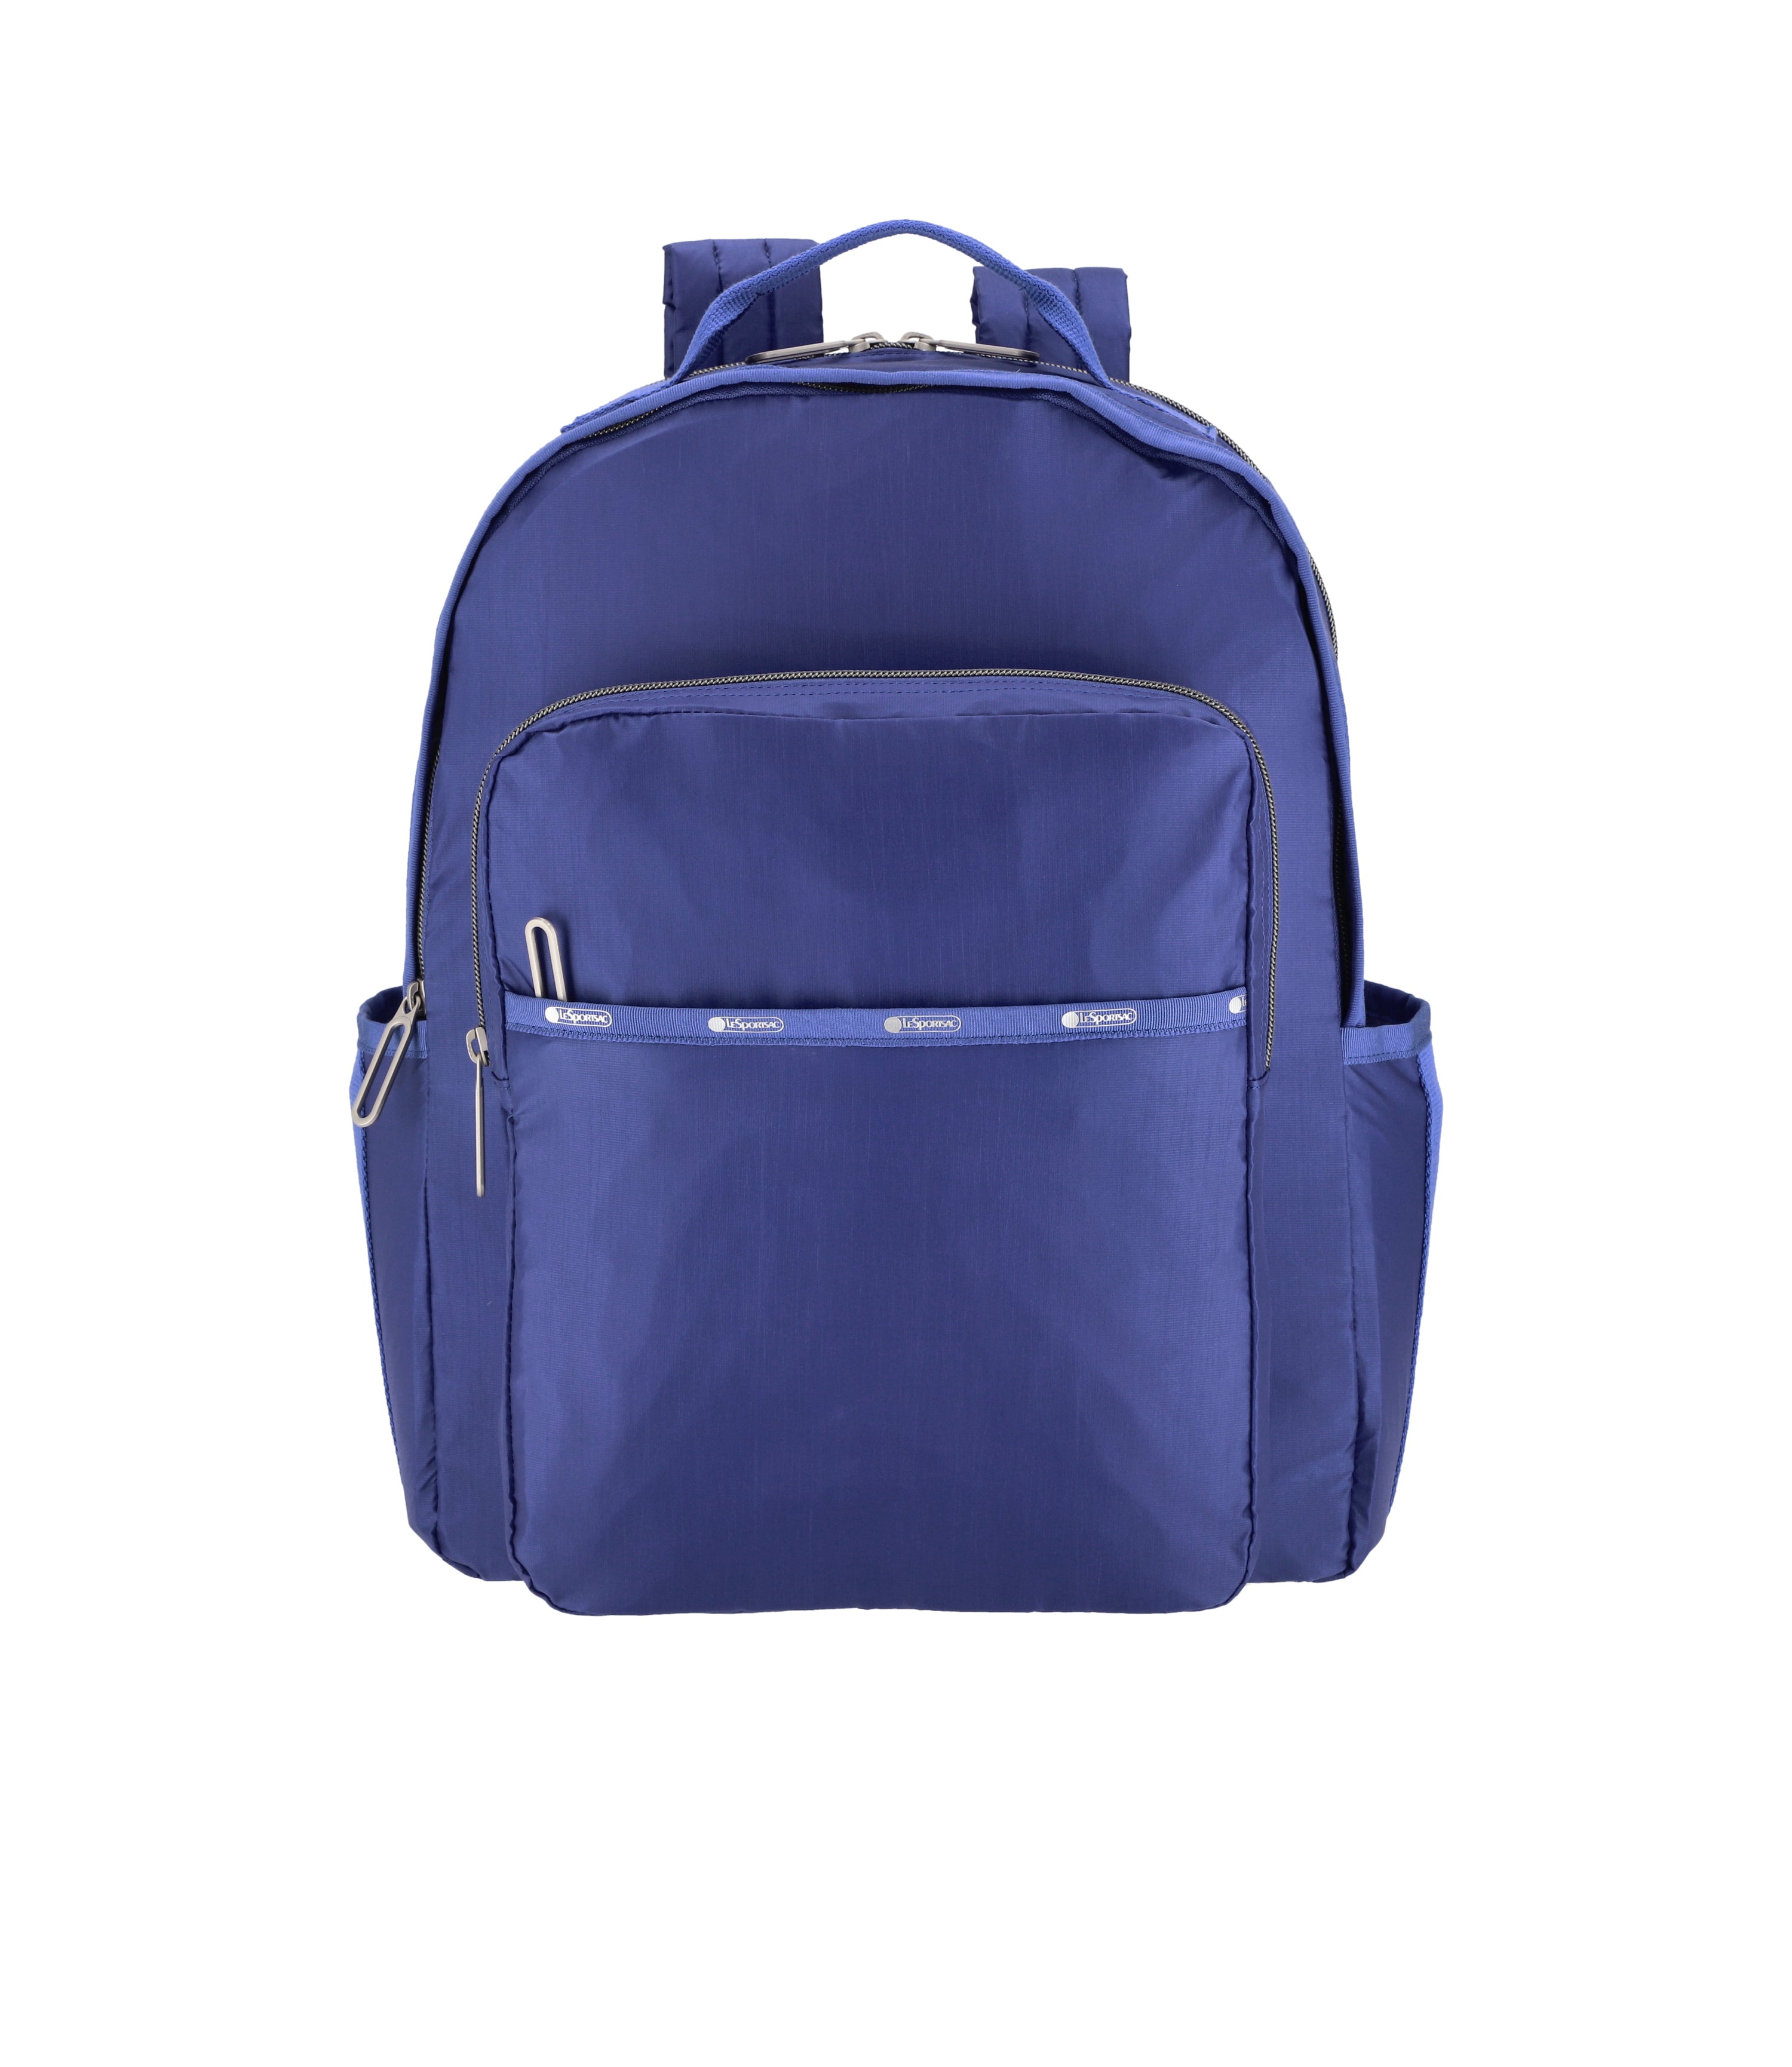 Essential Carryall Backpack - Dazzling Blue C – LeSportsac